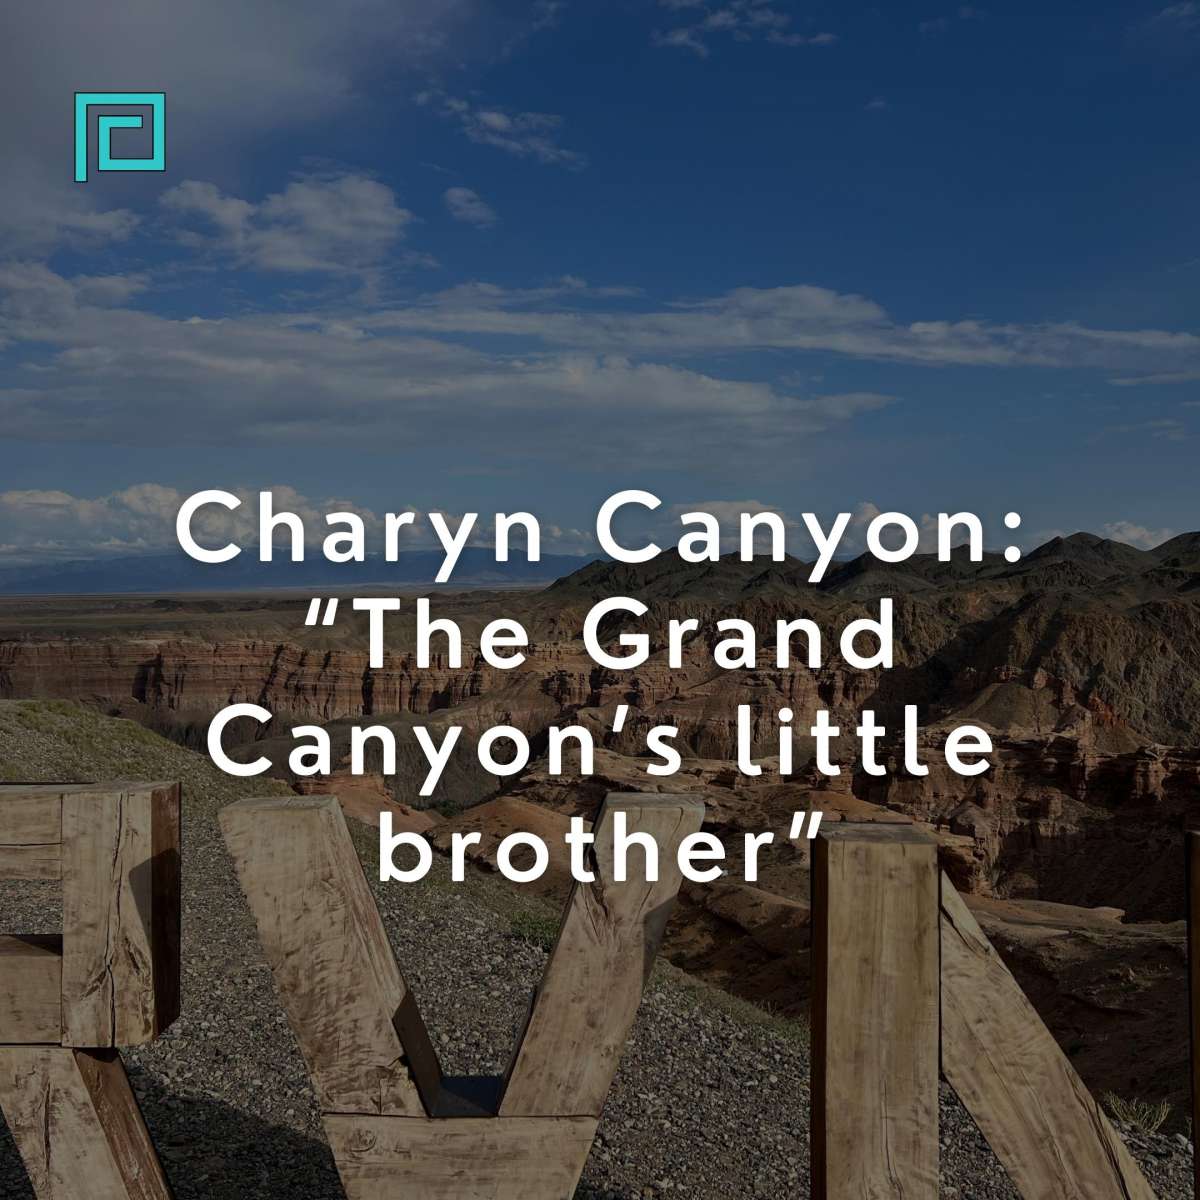 Charyn Canyon: “The Grand Canyon’s little brother”